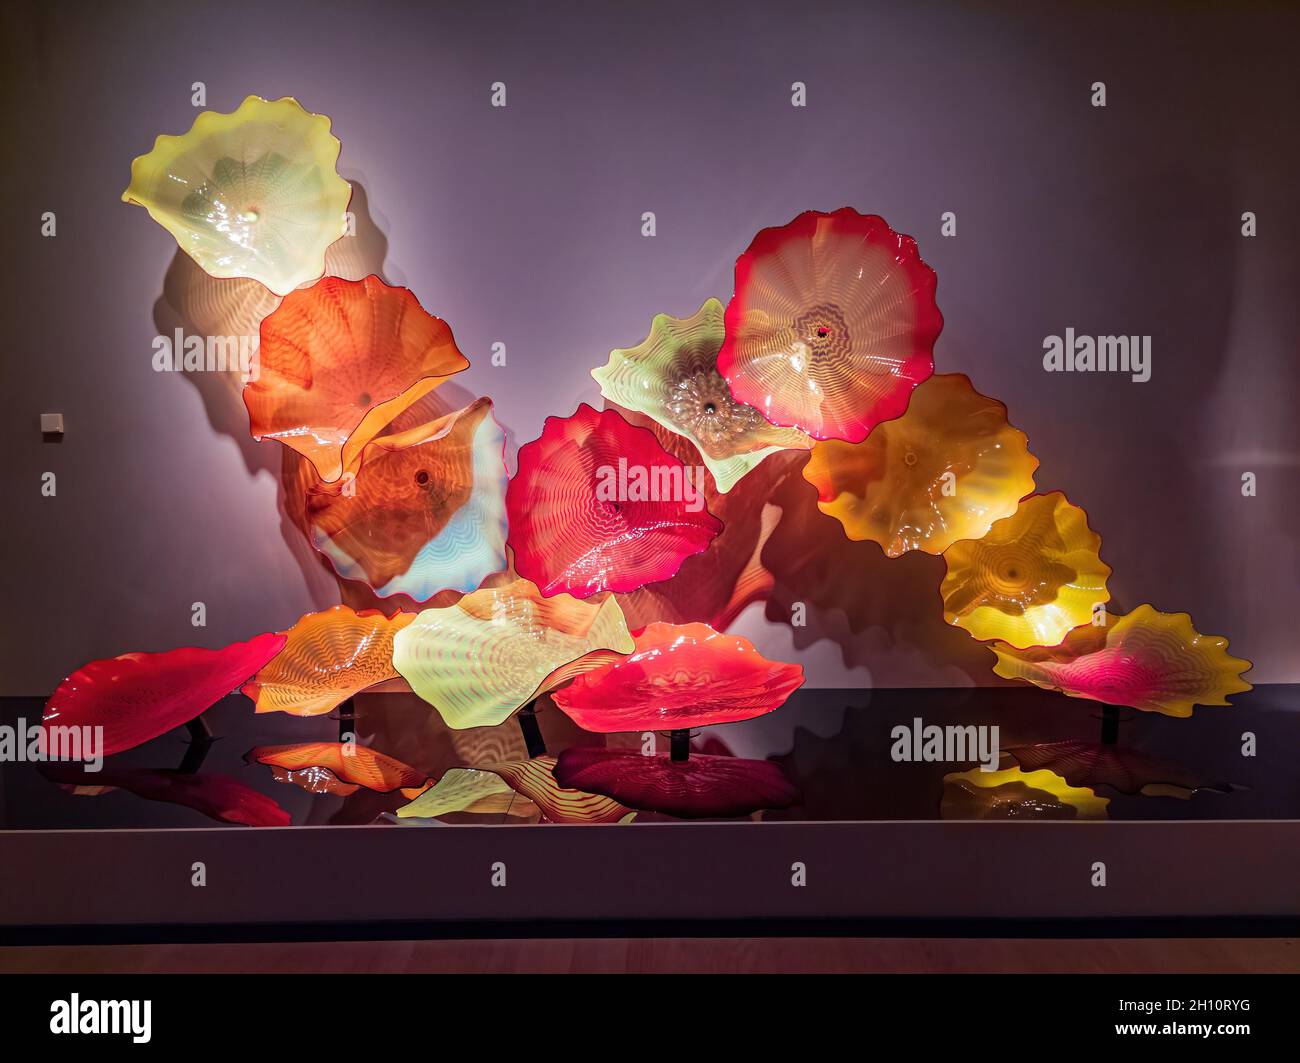 Oklahoma, OCT 2, 2021 - Dale Chihuly, The Collection exhibit in the Oklahoma City Museum of Art Stock Photo